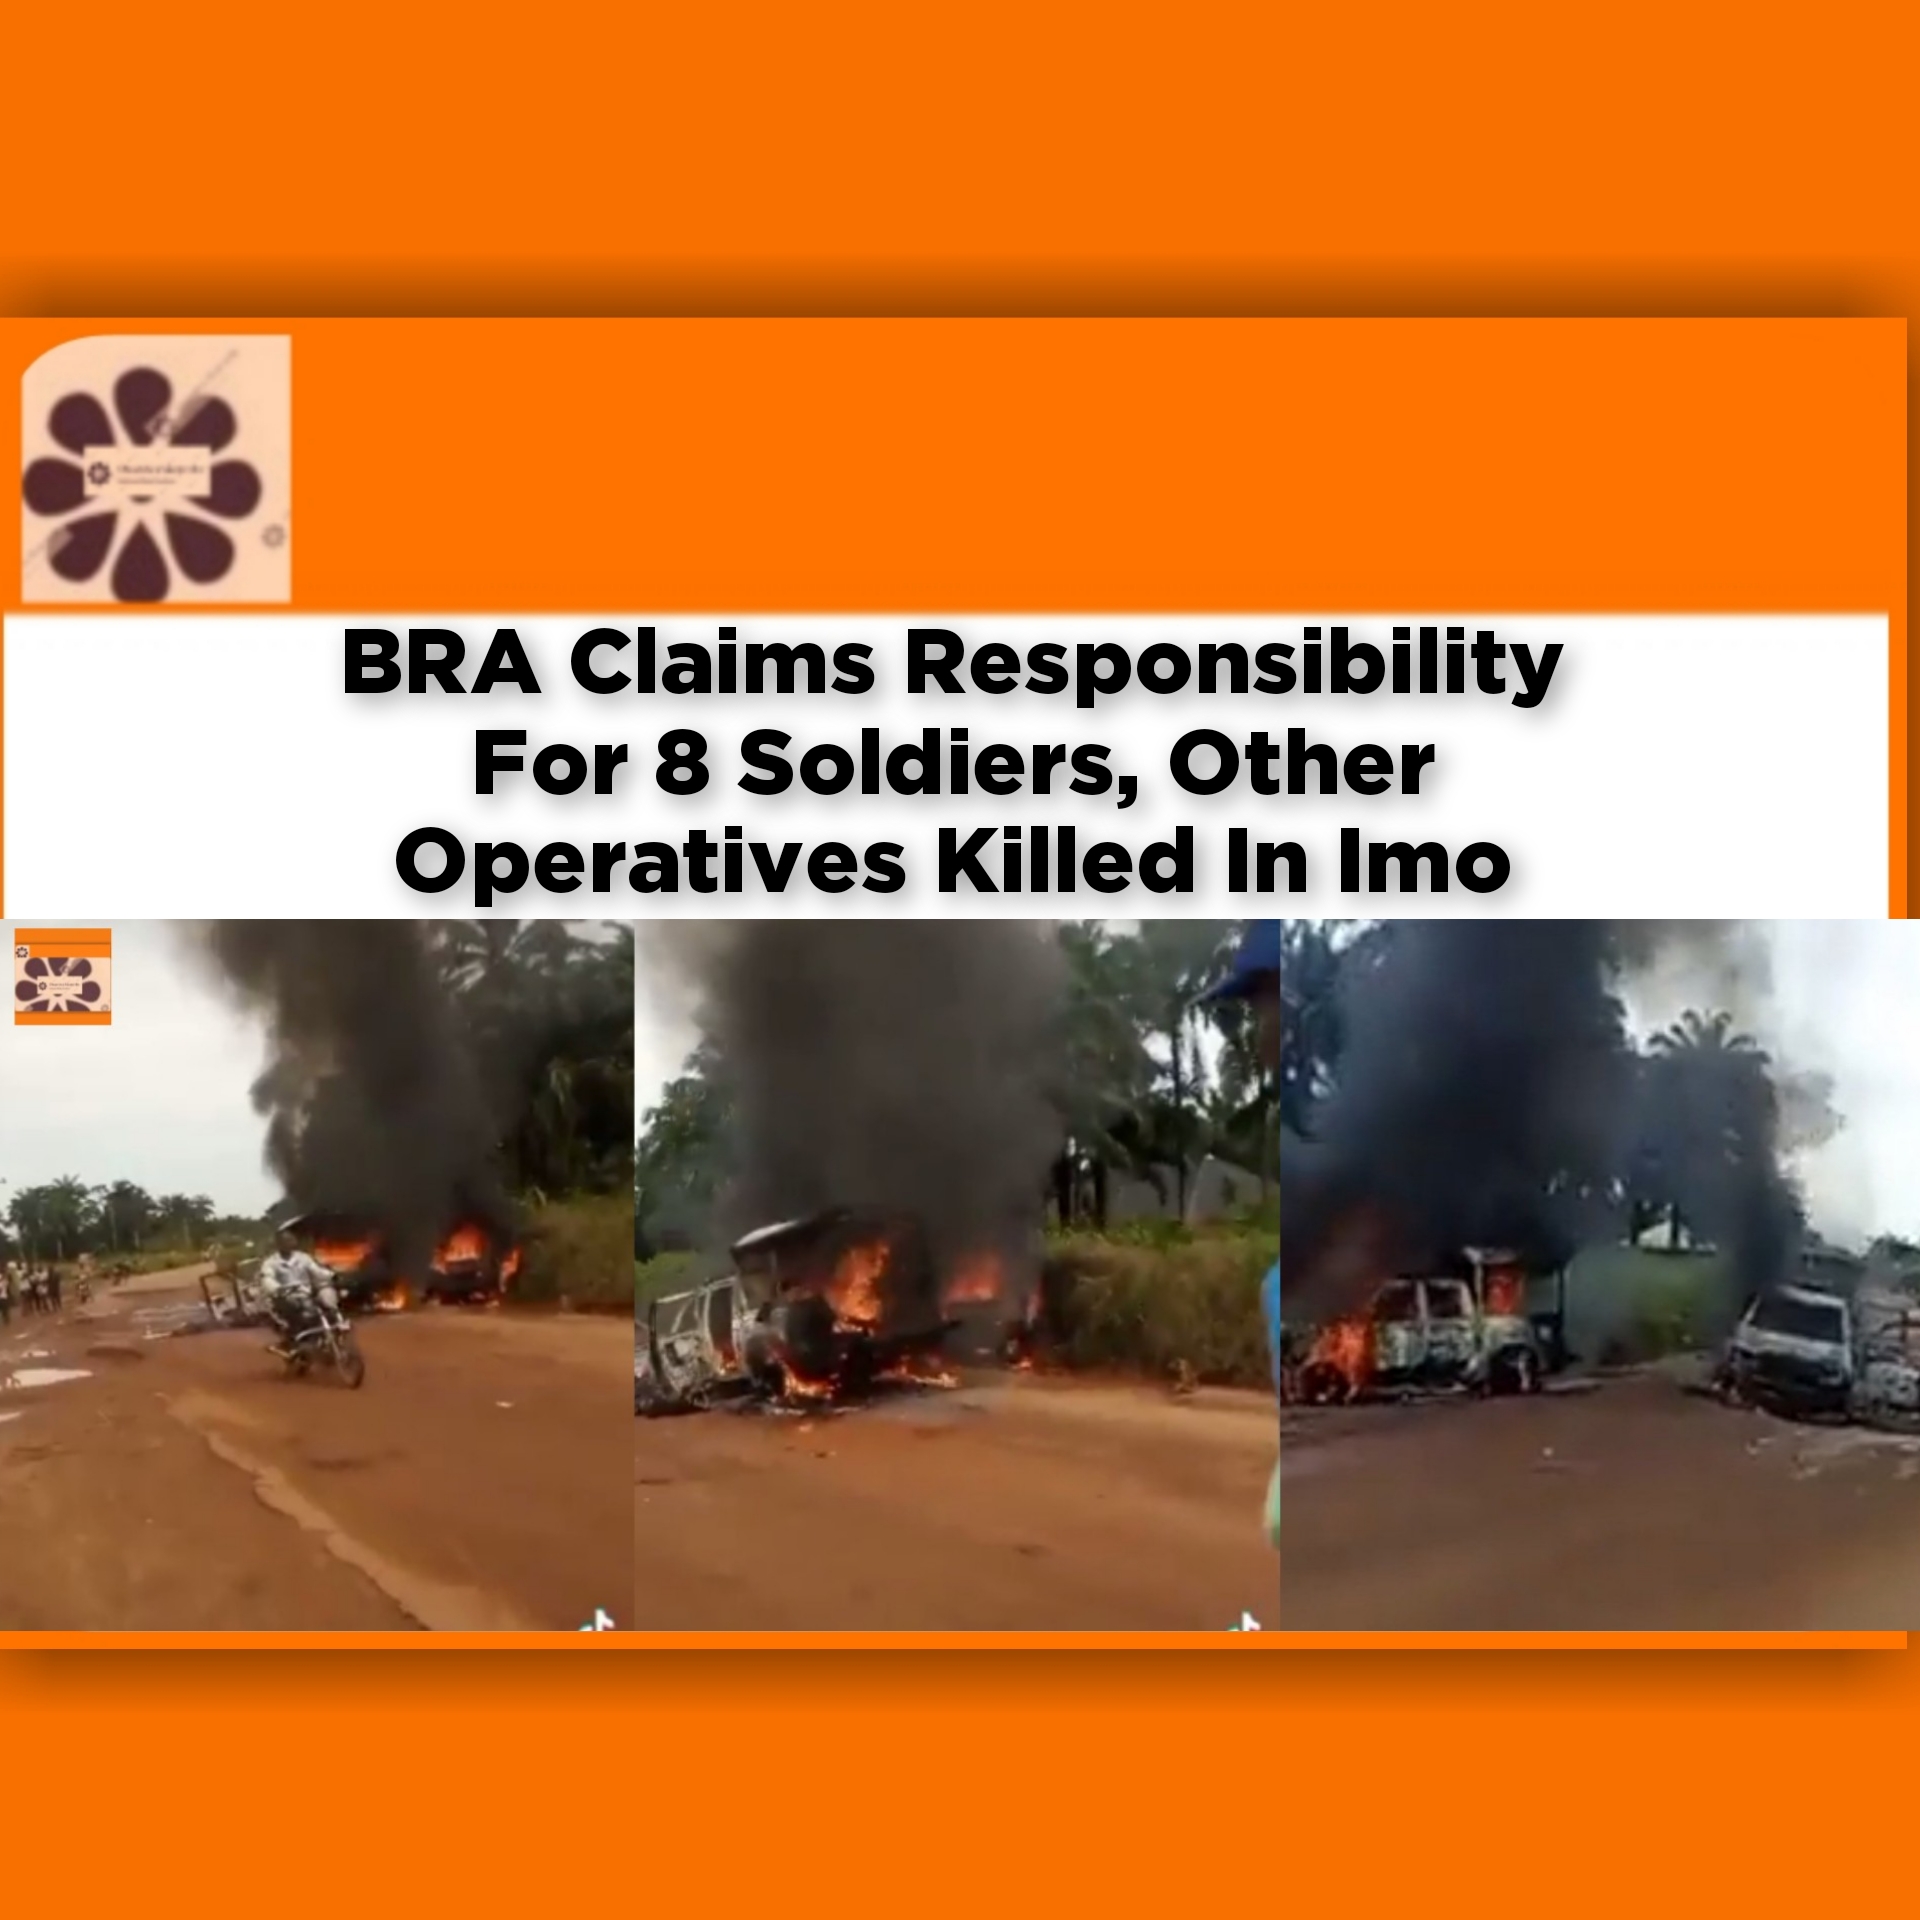 BRA Claims Responsibility For 8 Soldiers, Other Operatives Killed In Imo ~ OsazuwaAkonedo #husband,